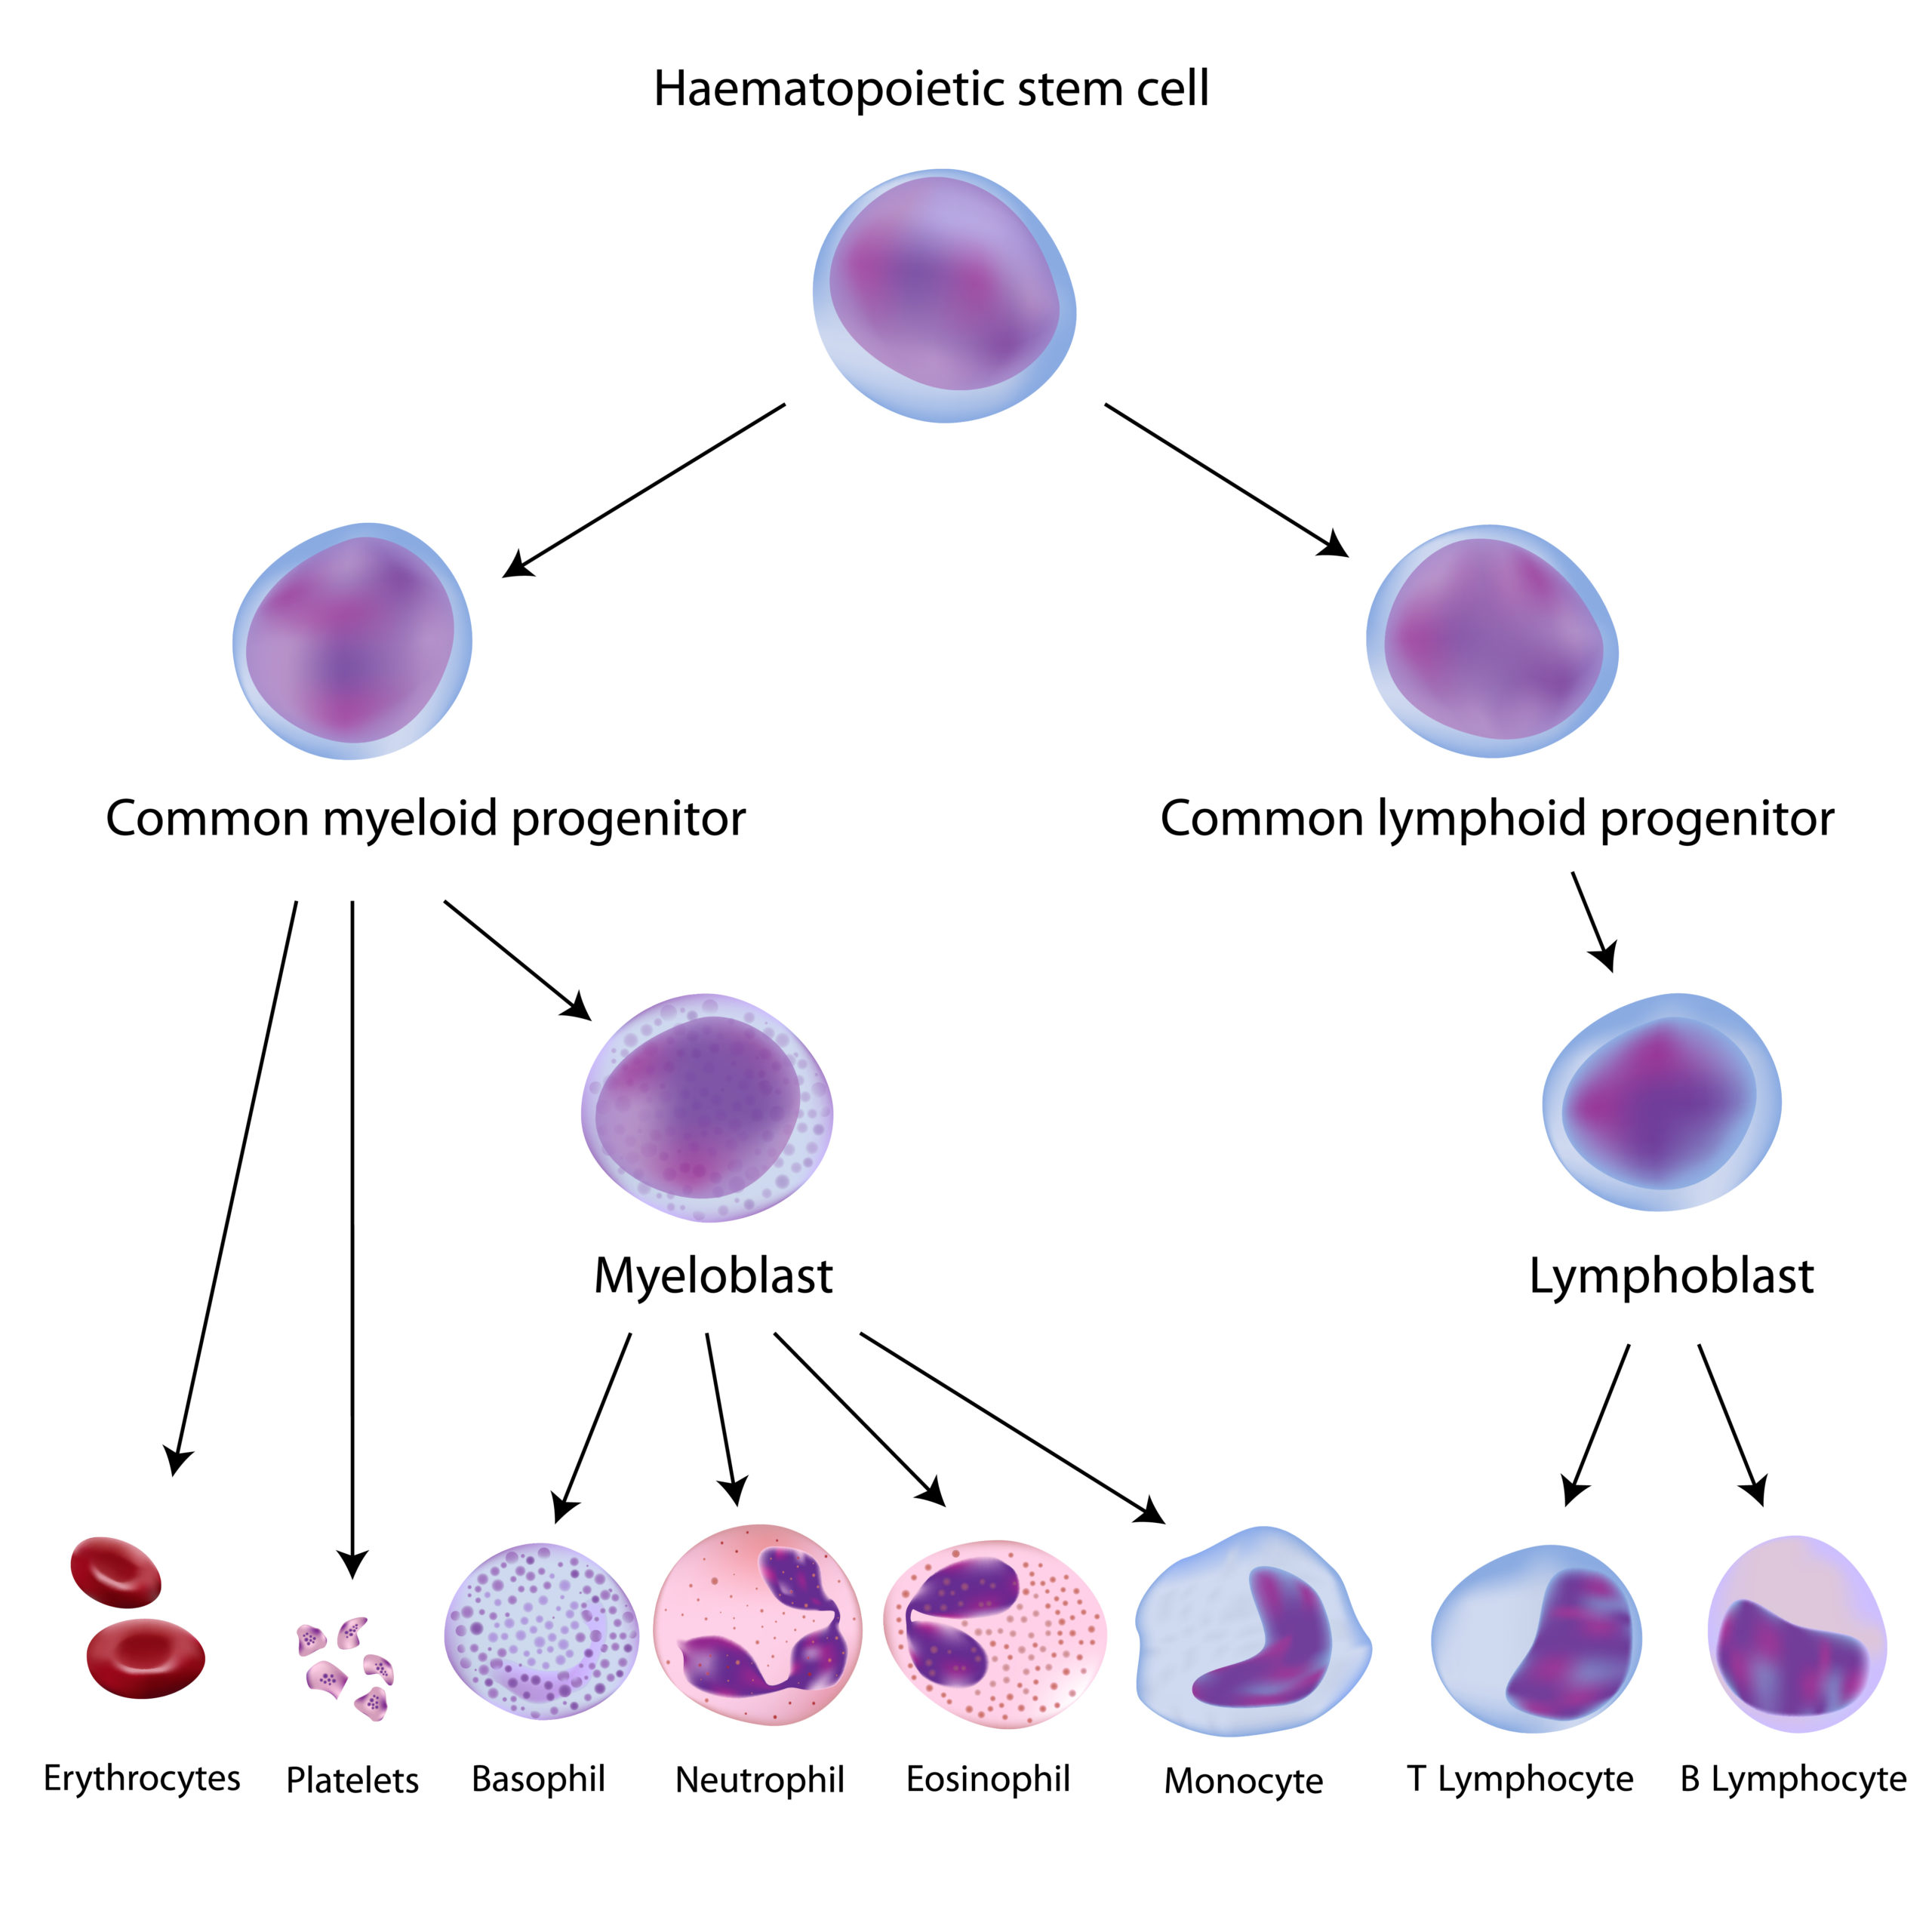 Hematopoiesis - the process of blood cell formation.